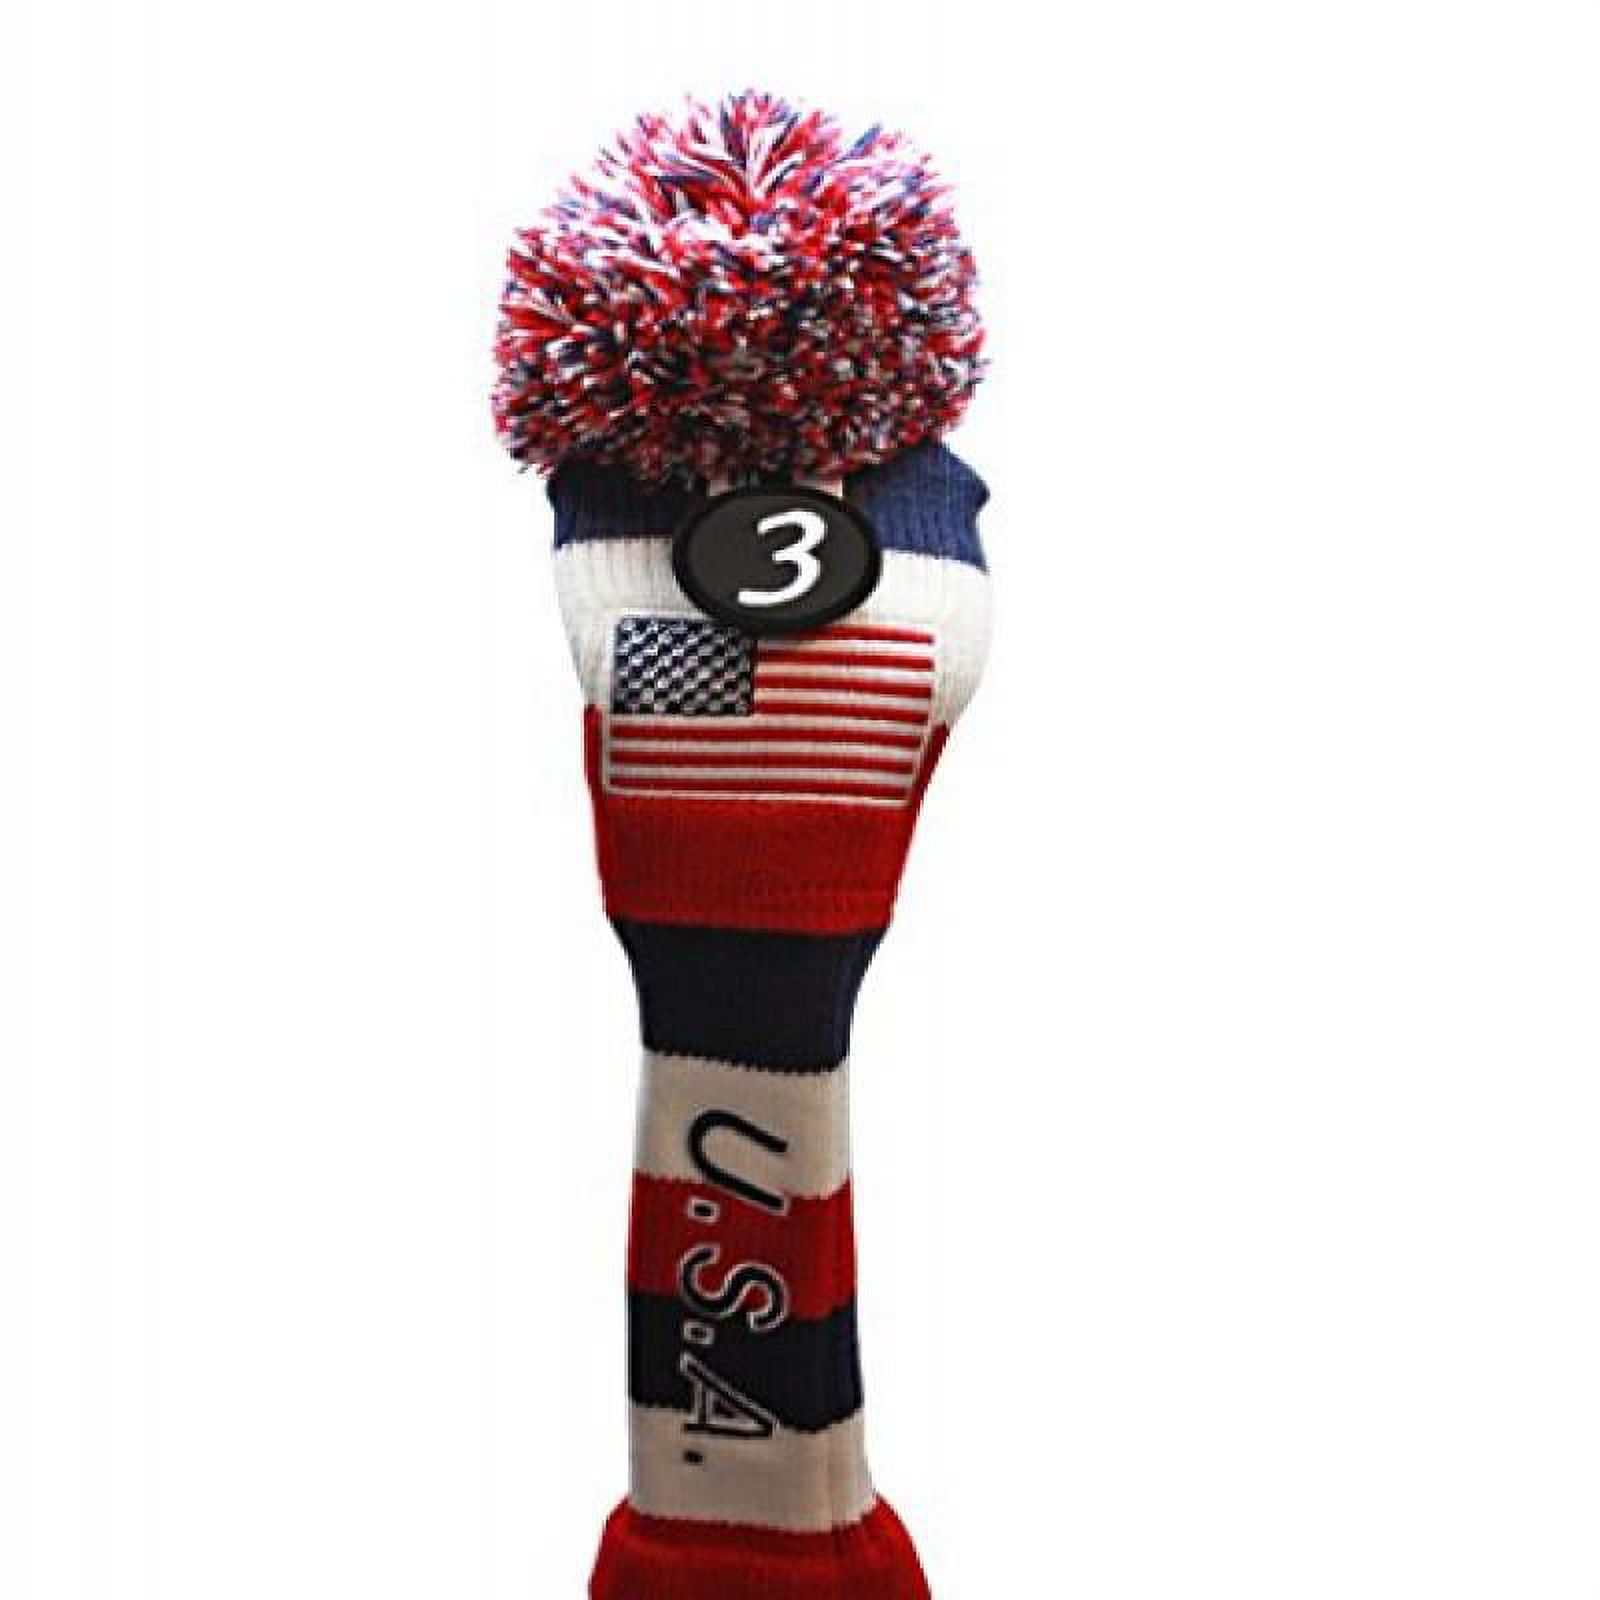 USA Majek Golf Club #3 Fairway Wood Pom Pom Knit Classic Traditional Retro Head Cover Headcover for Metal Woods - image 1 of 4